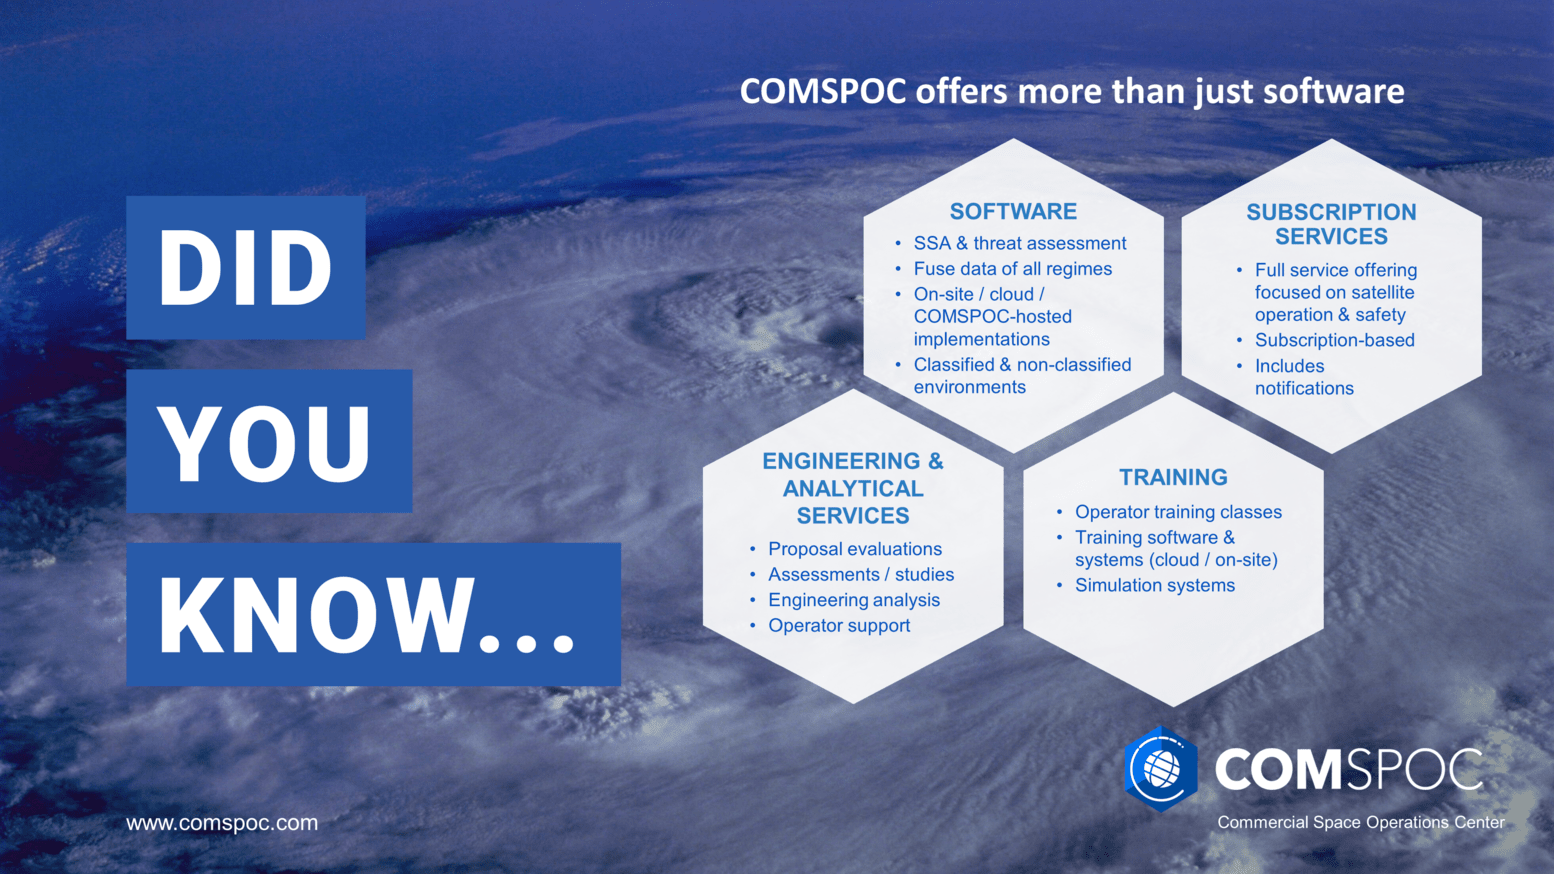 Did You Know: COMSPOC offers more than just software.